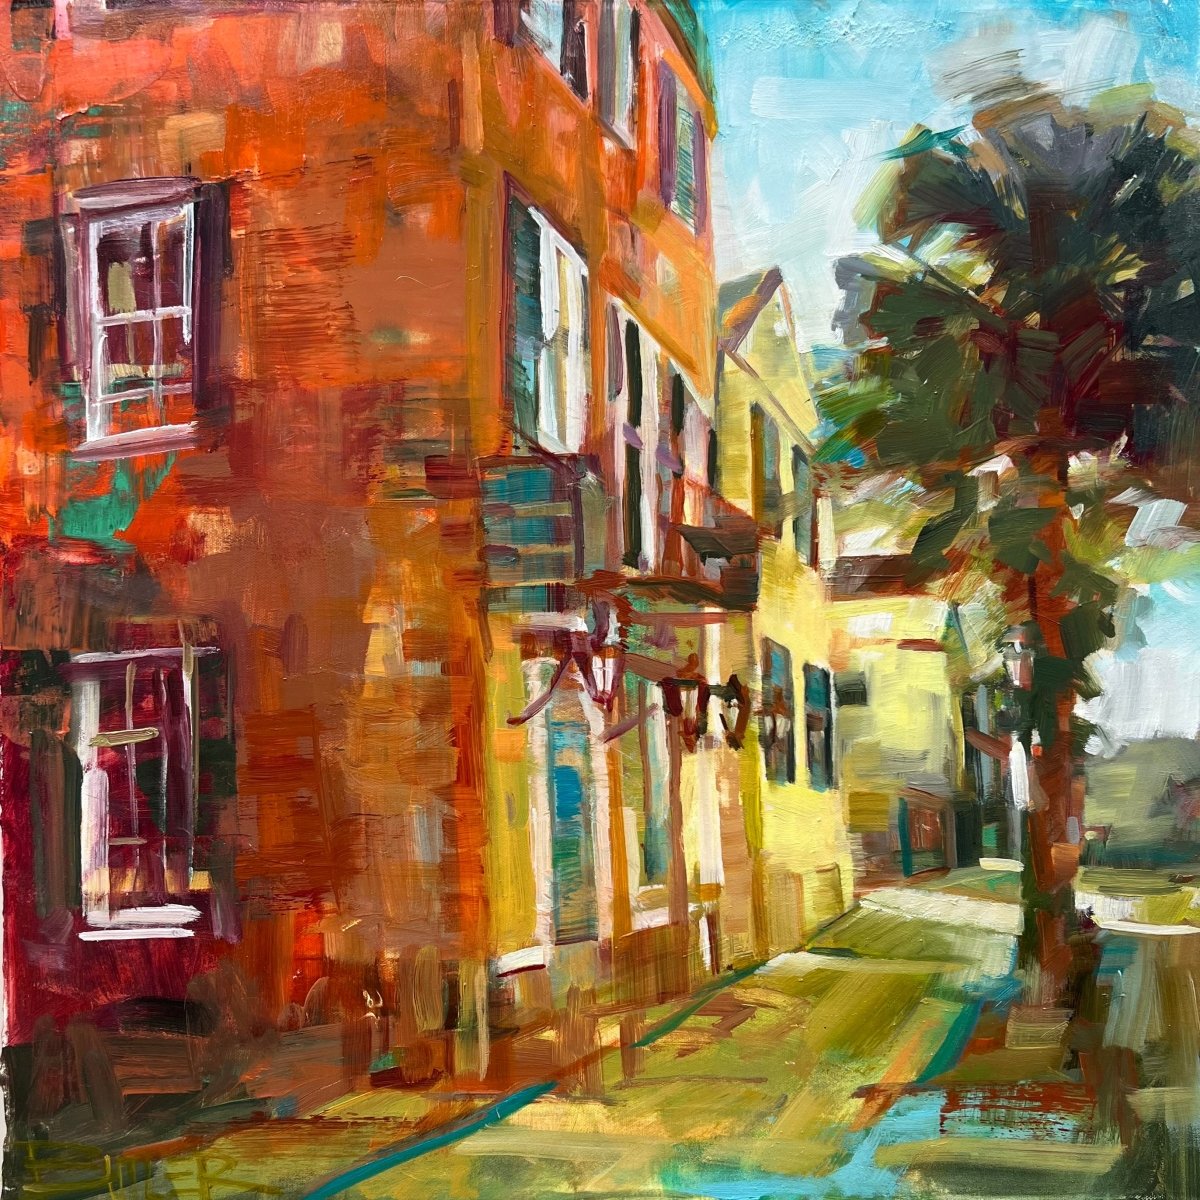 Charleston Stroll by Curt Butler at LePrince Galleries